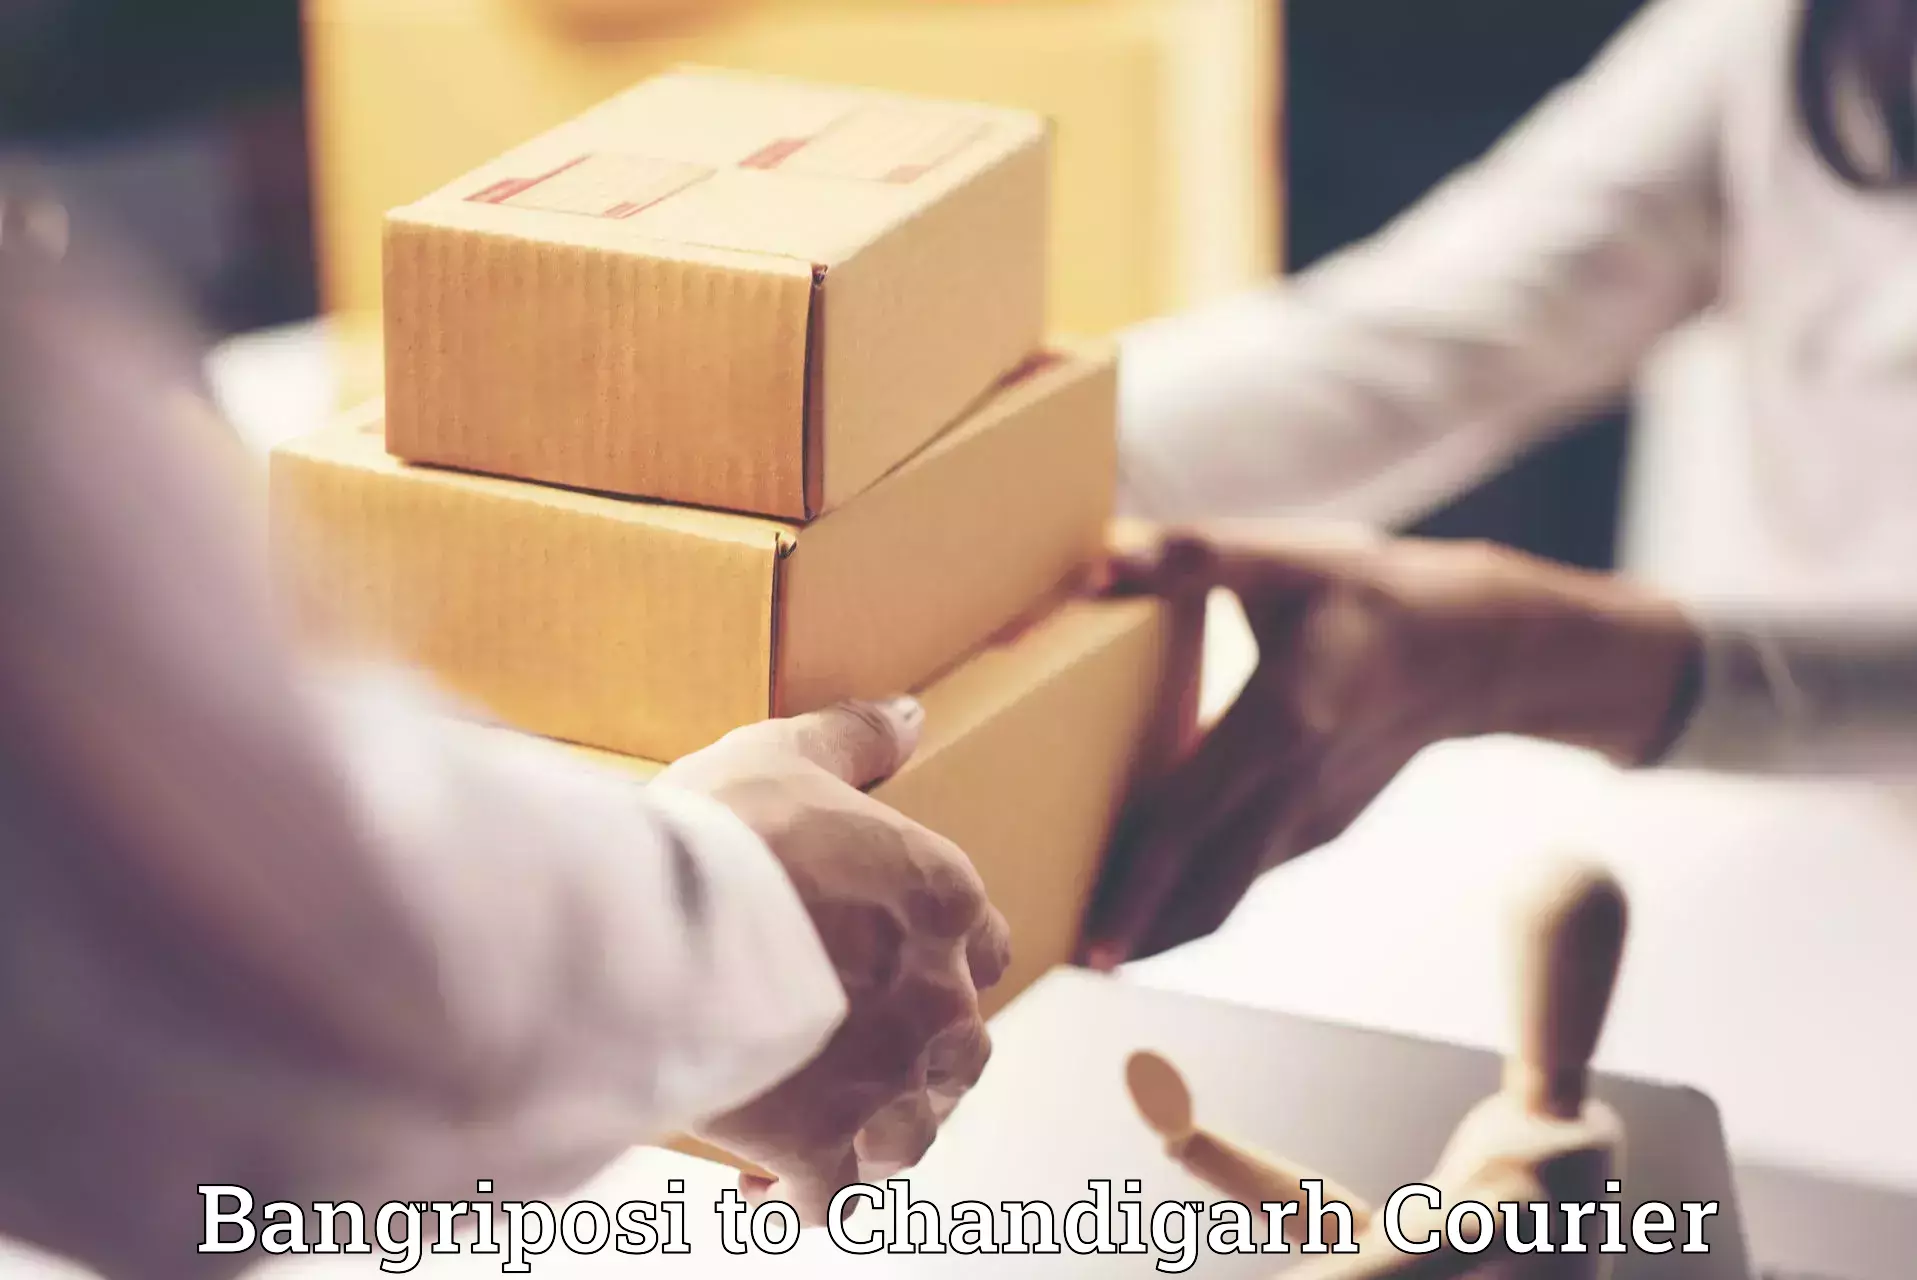 Moving and storage services Bangriposi to Chandigarh